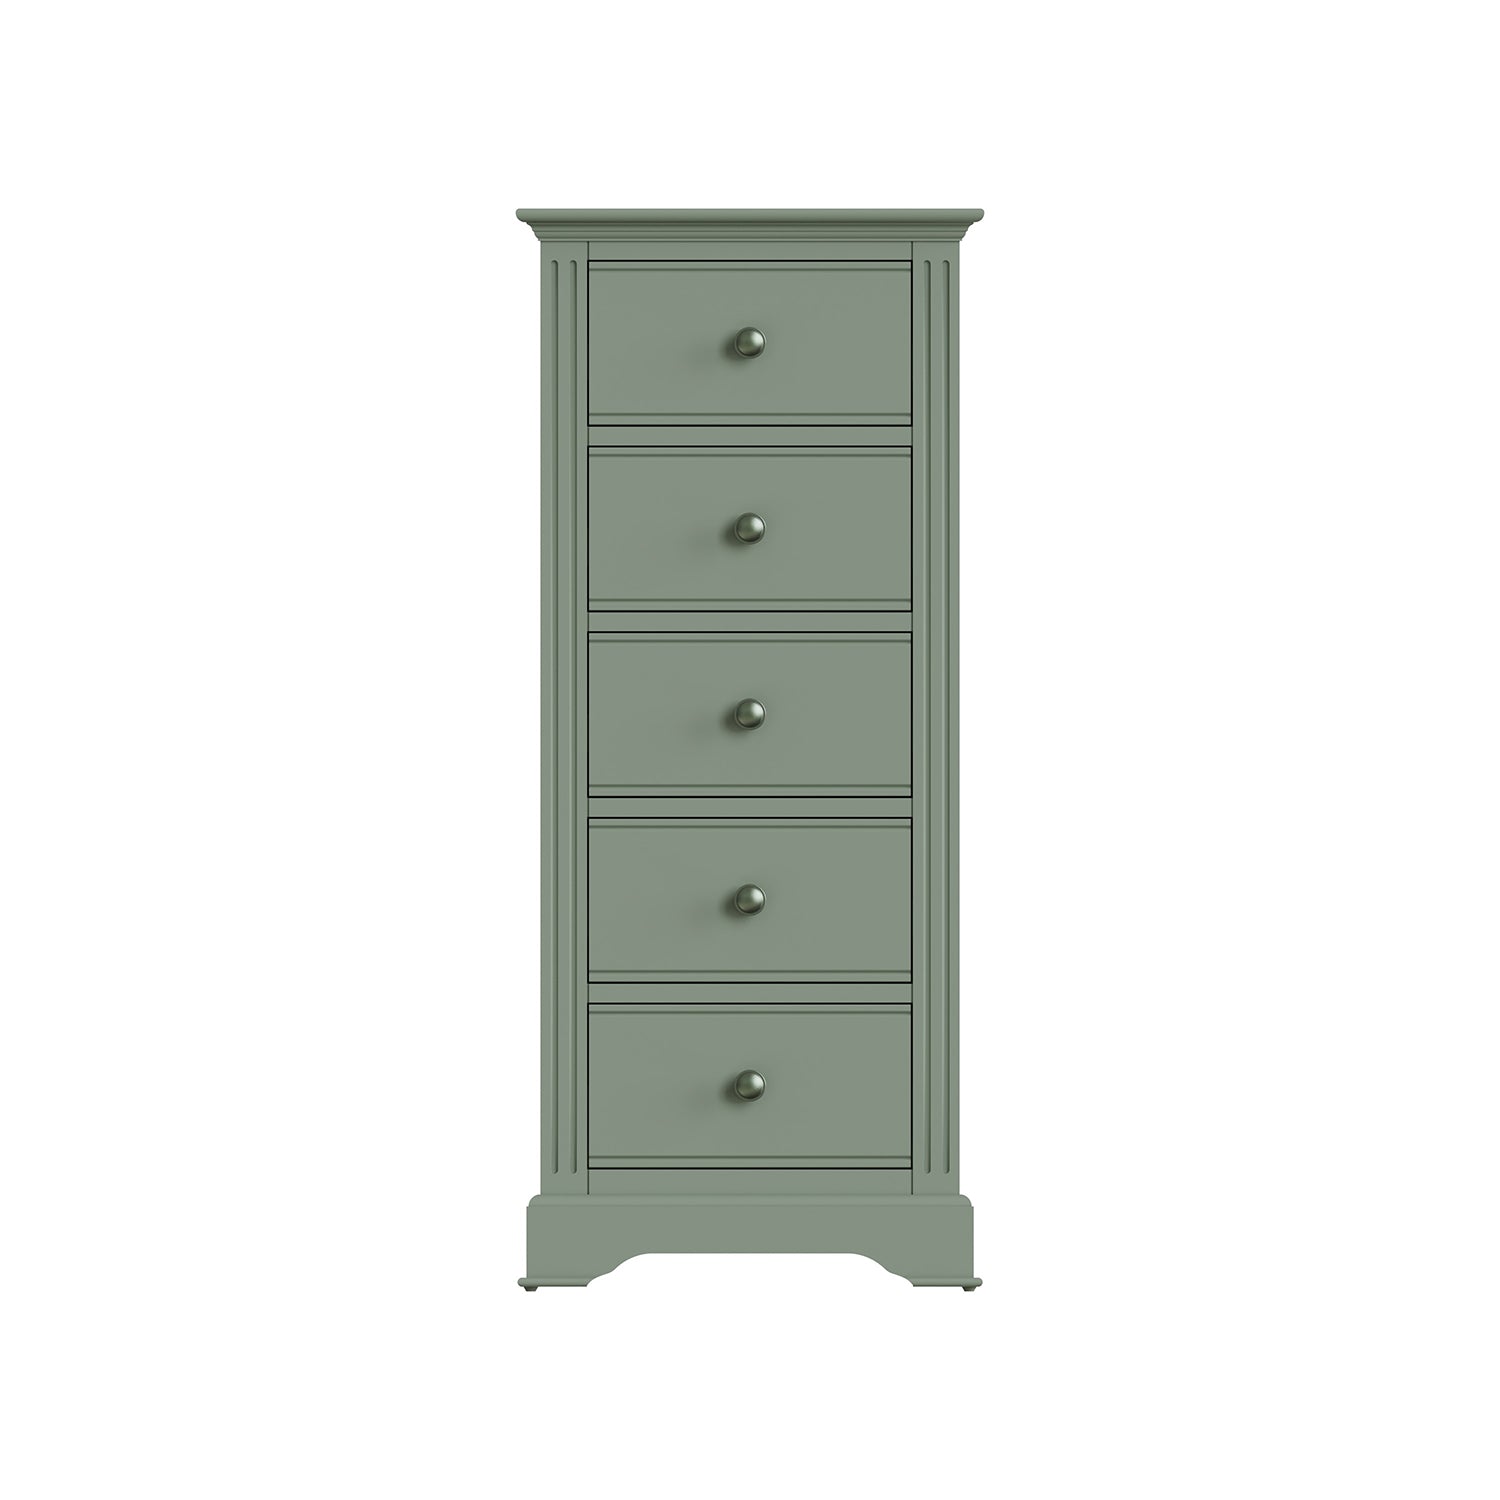 Billingford Olive Chest of Drawers - 5 Drawer Narrow